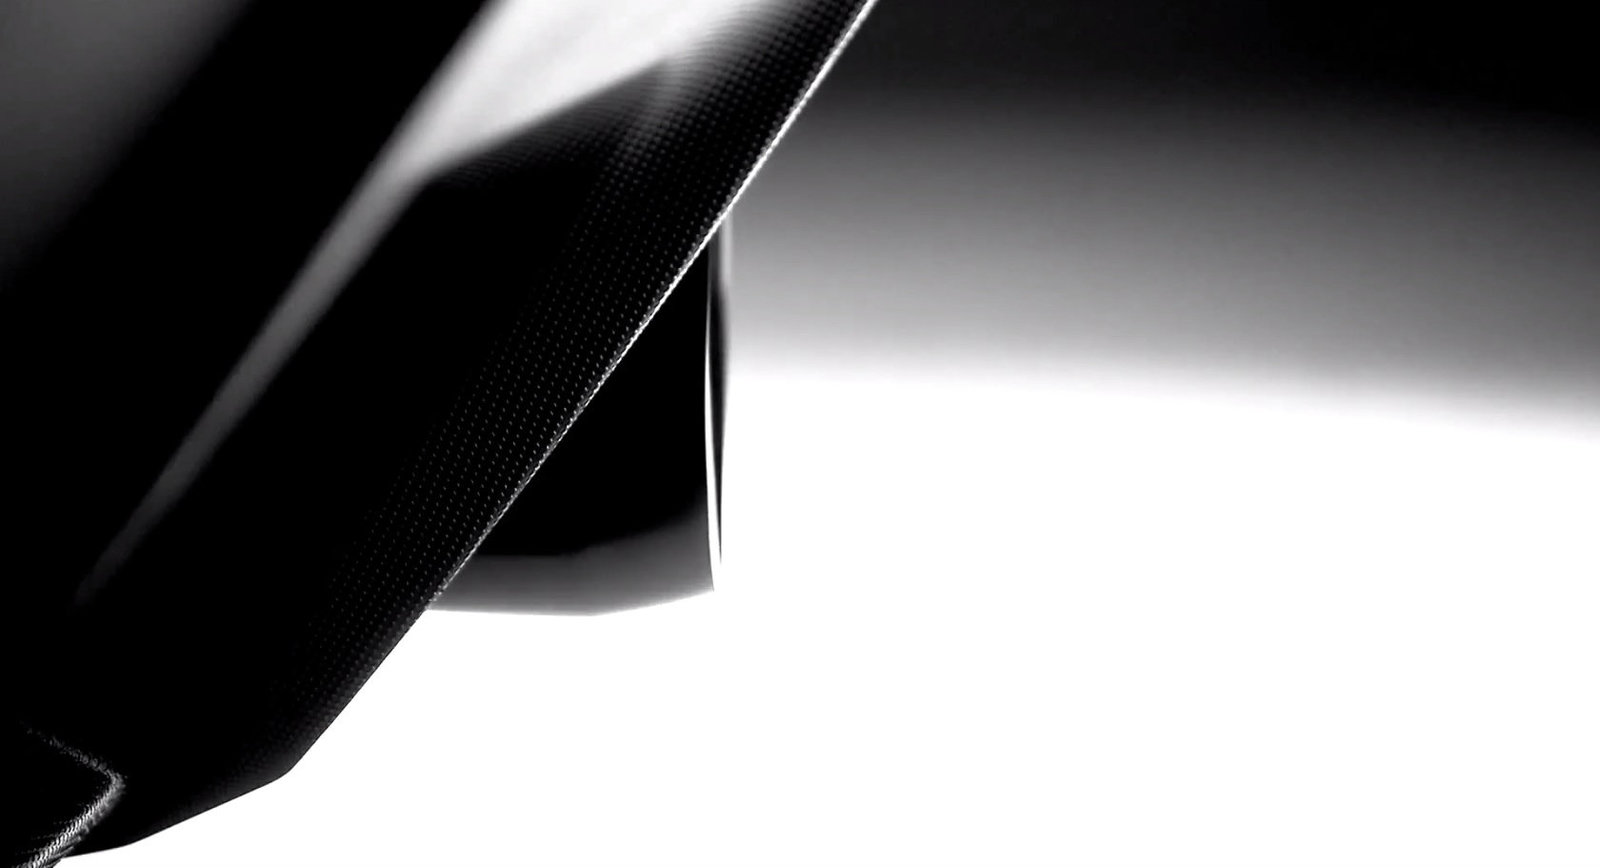 teaser-confirms-2016-shelby-mustang-gt350-new-details-emerge-video-photo-gallery_4.jpg